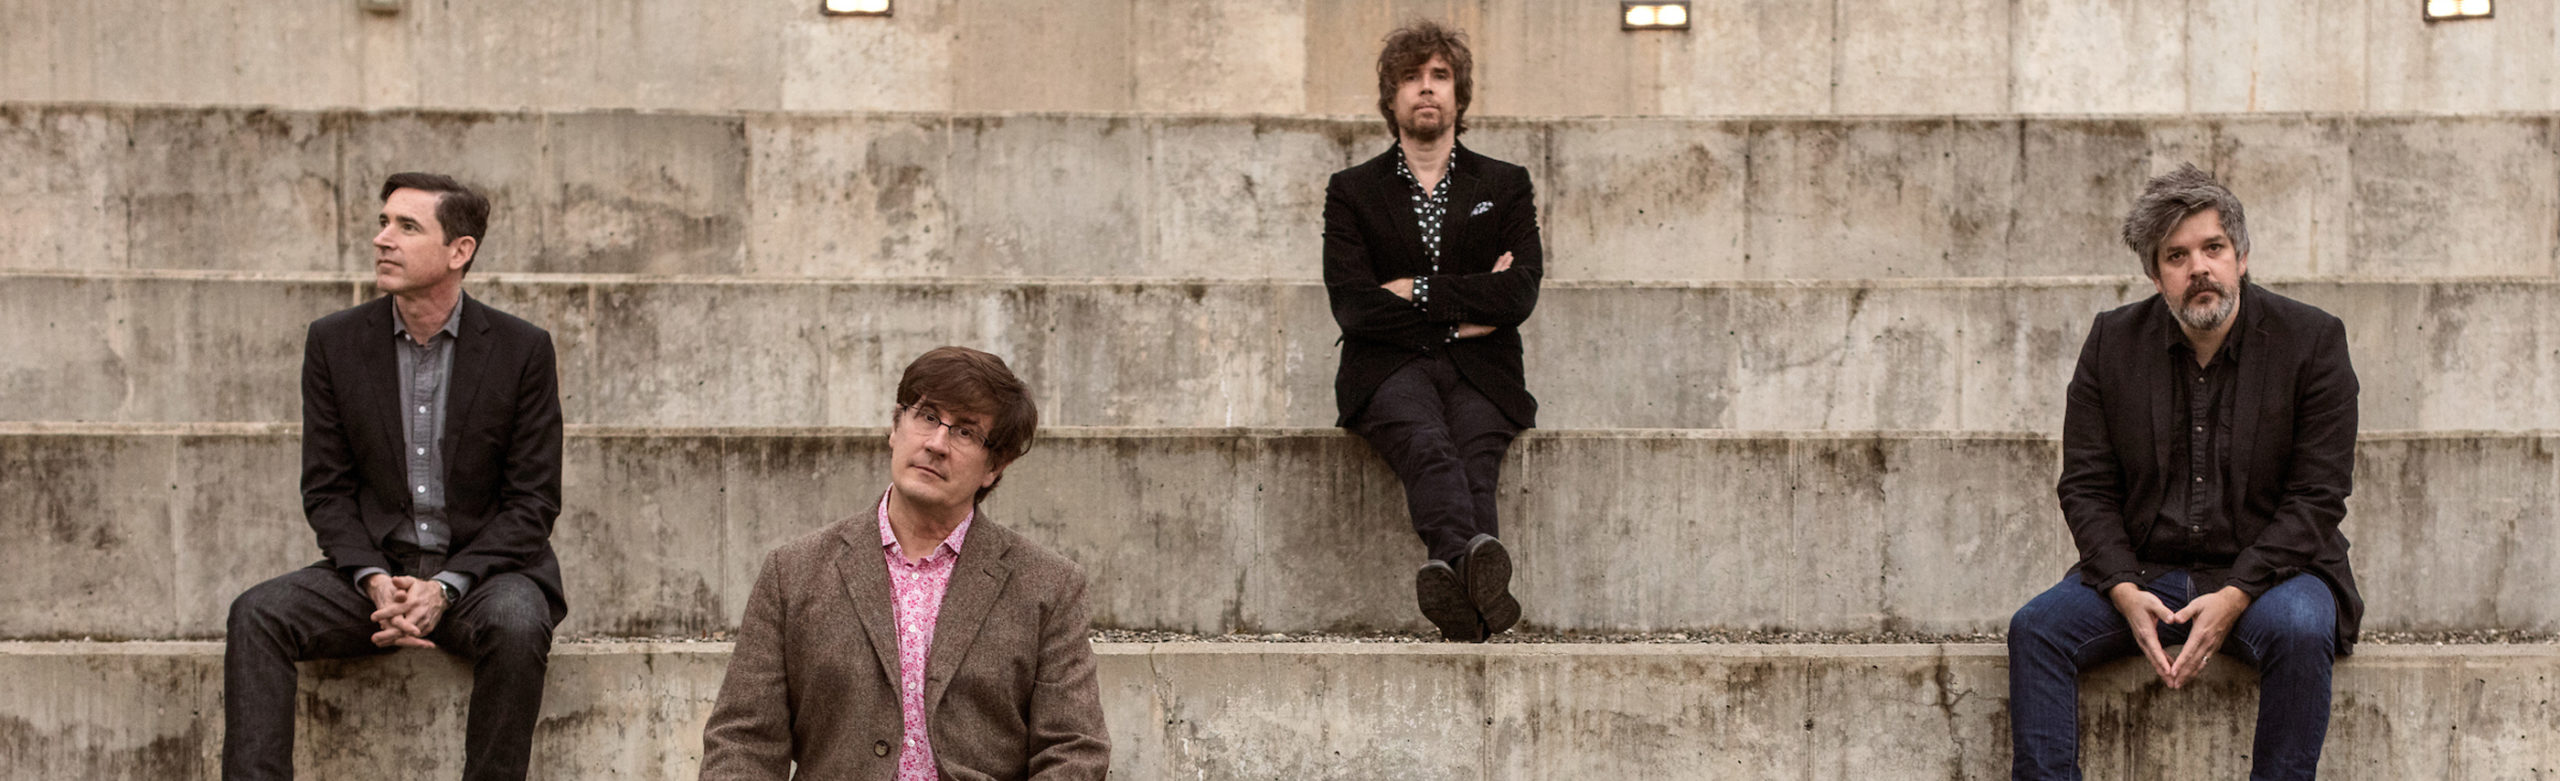 Event Info: The Mountain Goats at the Top Hat 2019 Image